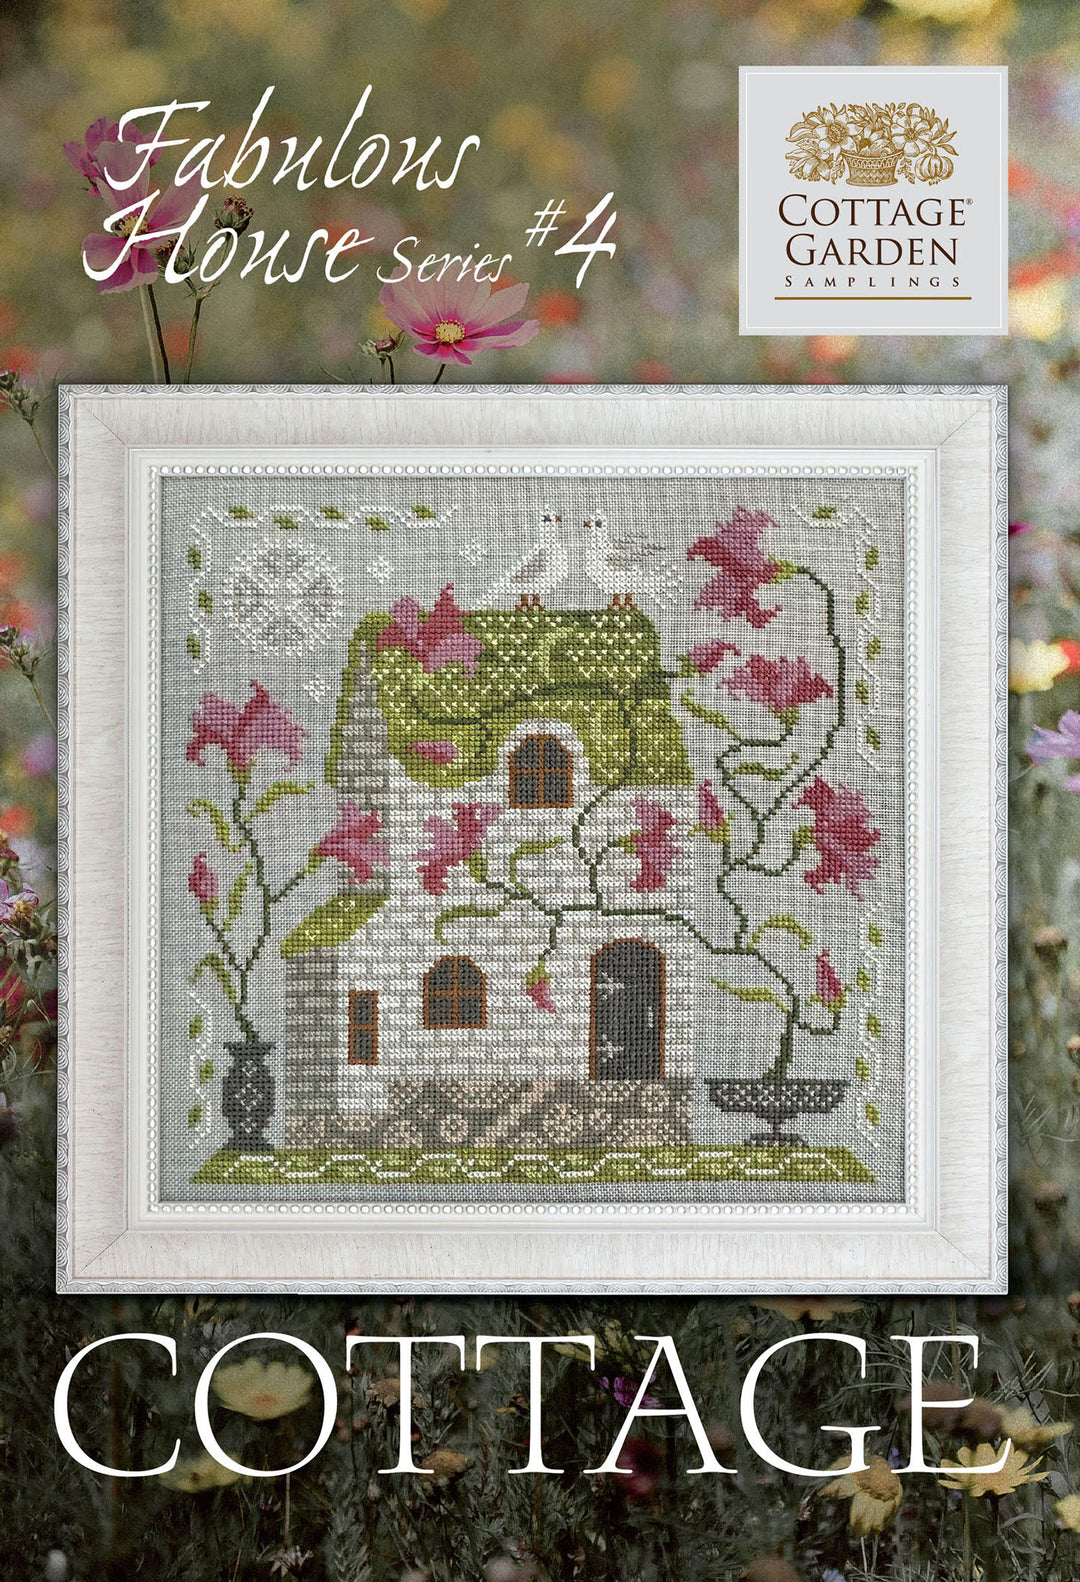 Pre-Order: Cottage - Fabulous House Series #4 | Cottage Garden Samplings (ships early March)